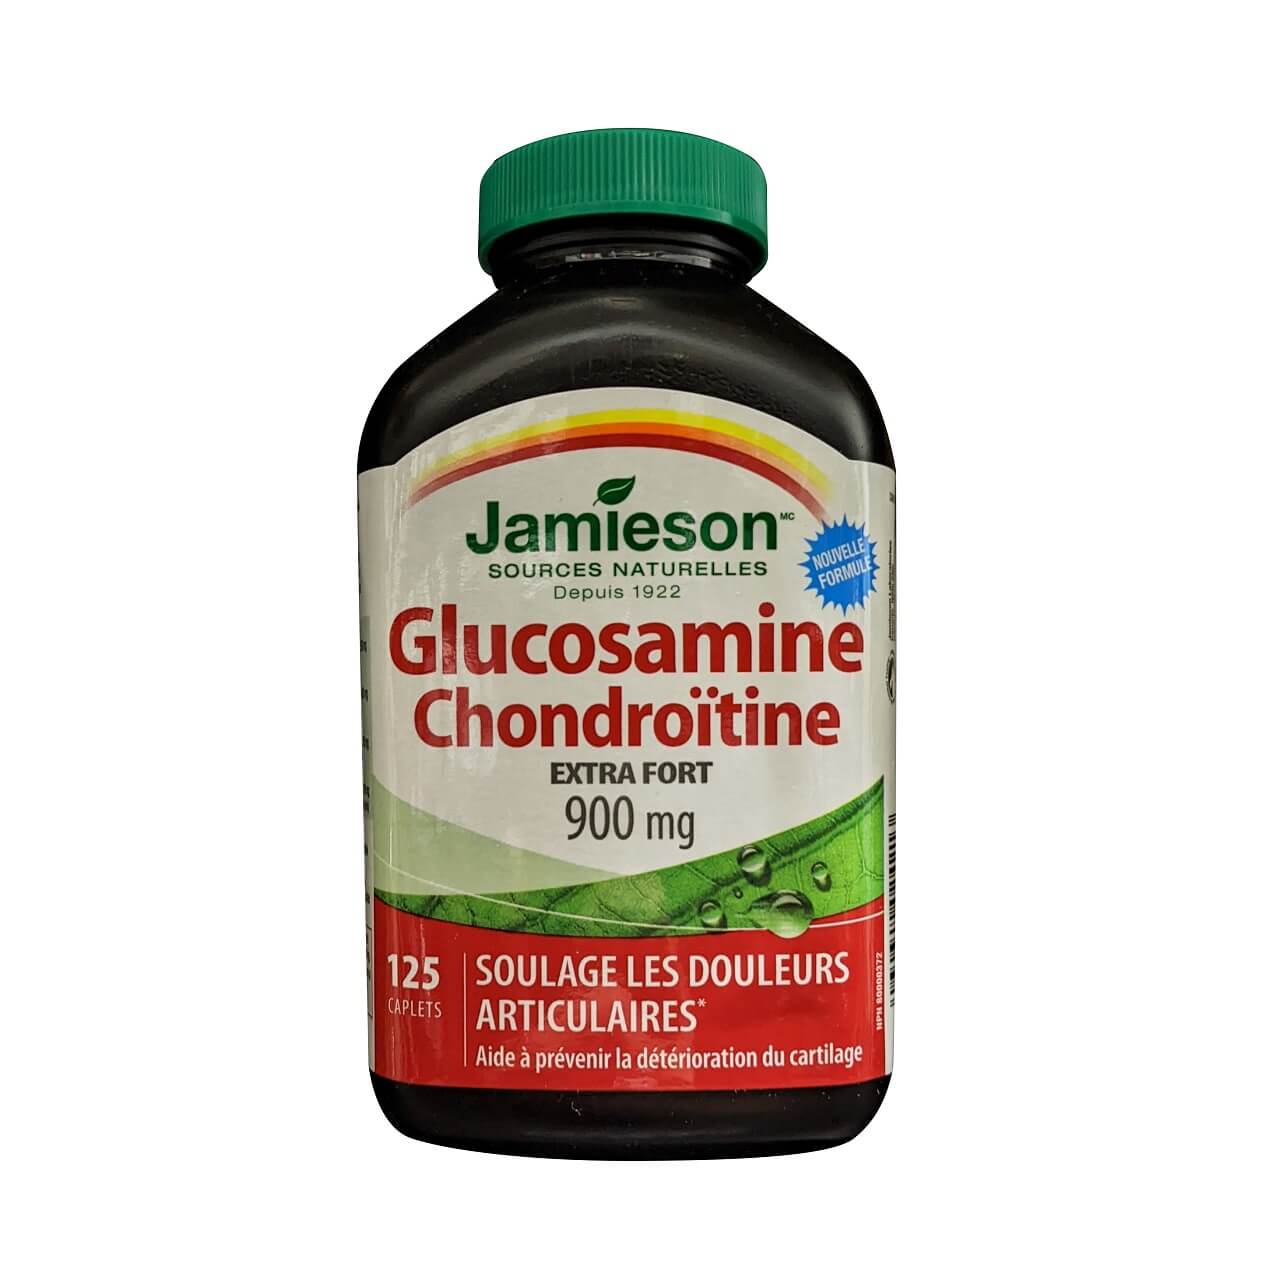 Product label for Jamieson Glucosamine Chondroitin Extra Strength 900 mg (125 caplets) in French